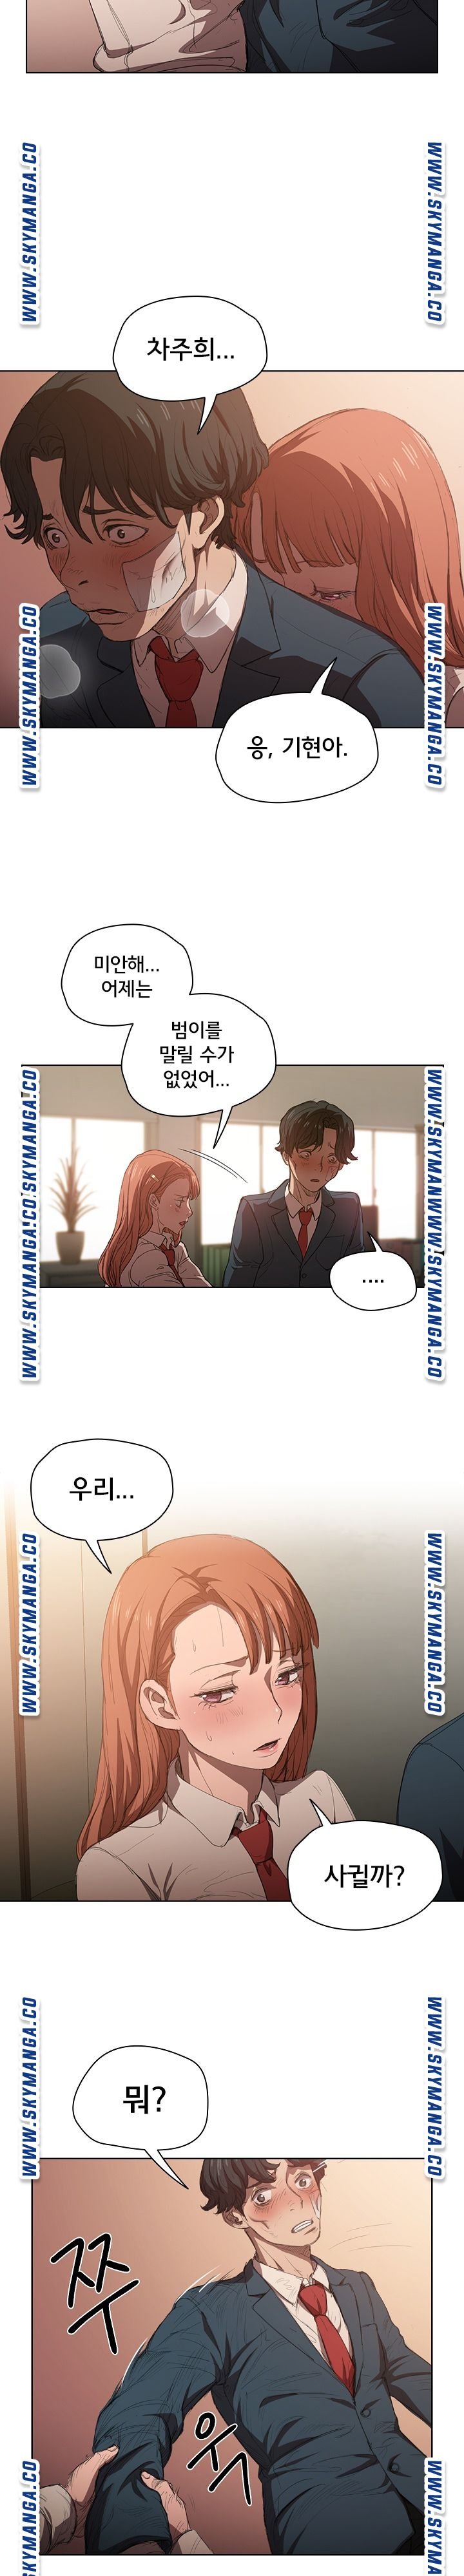 how-about-getting-lost-raw-chap-2-16